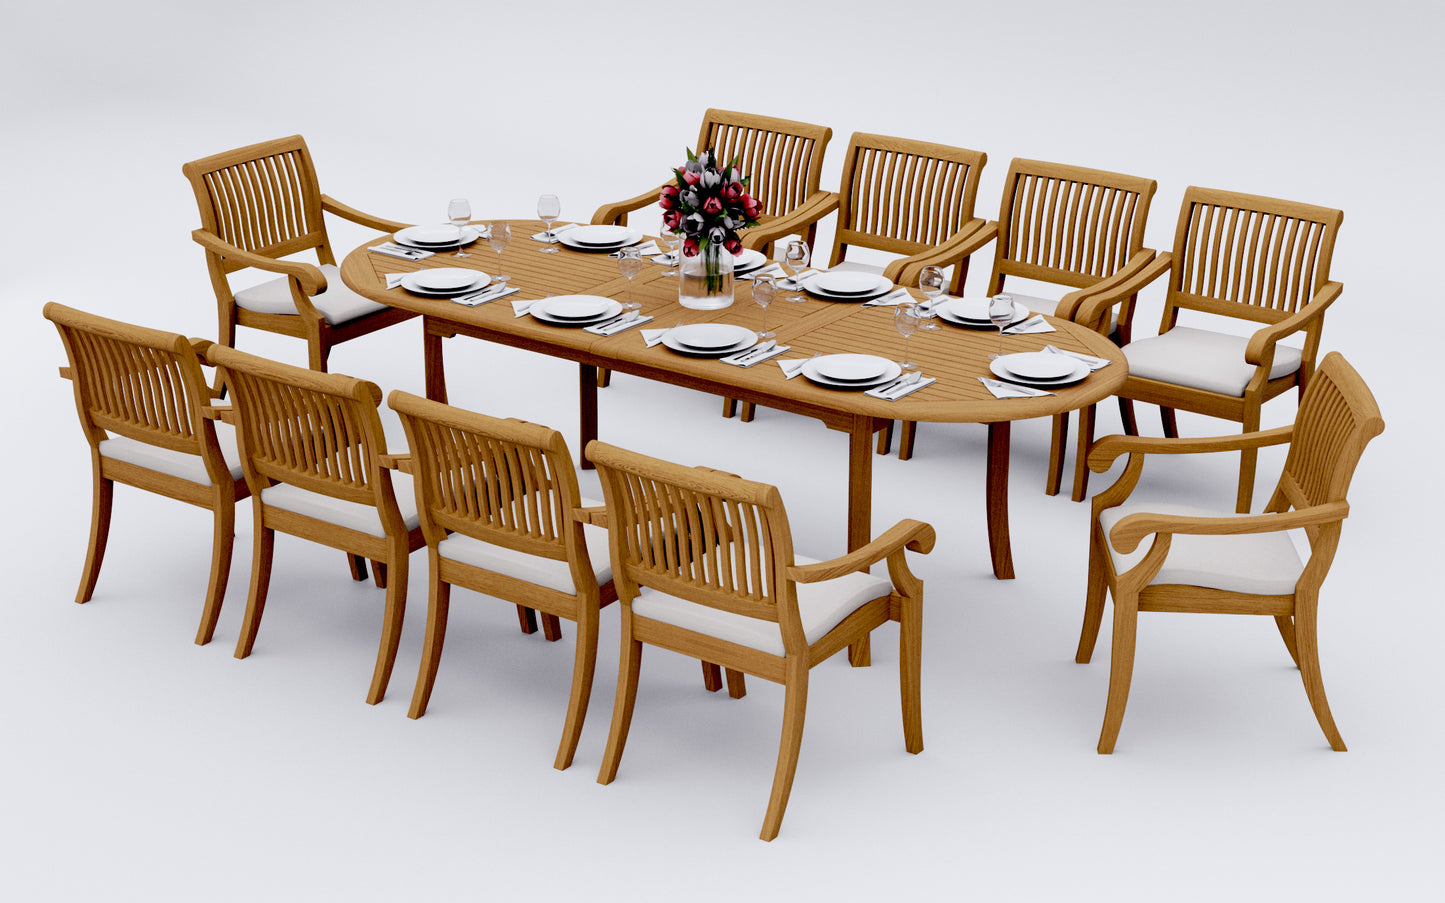 94" Oval Table with Arbor Arm Chairs